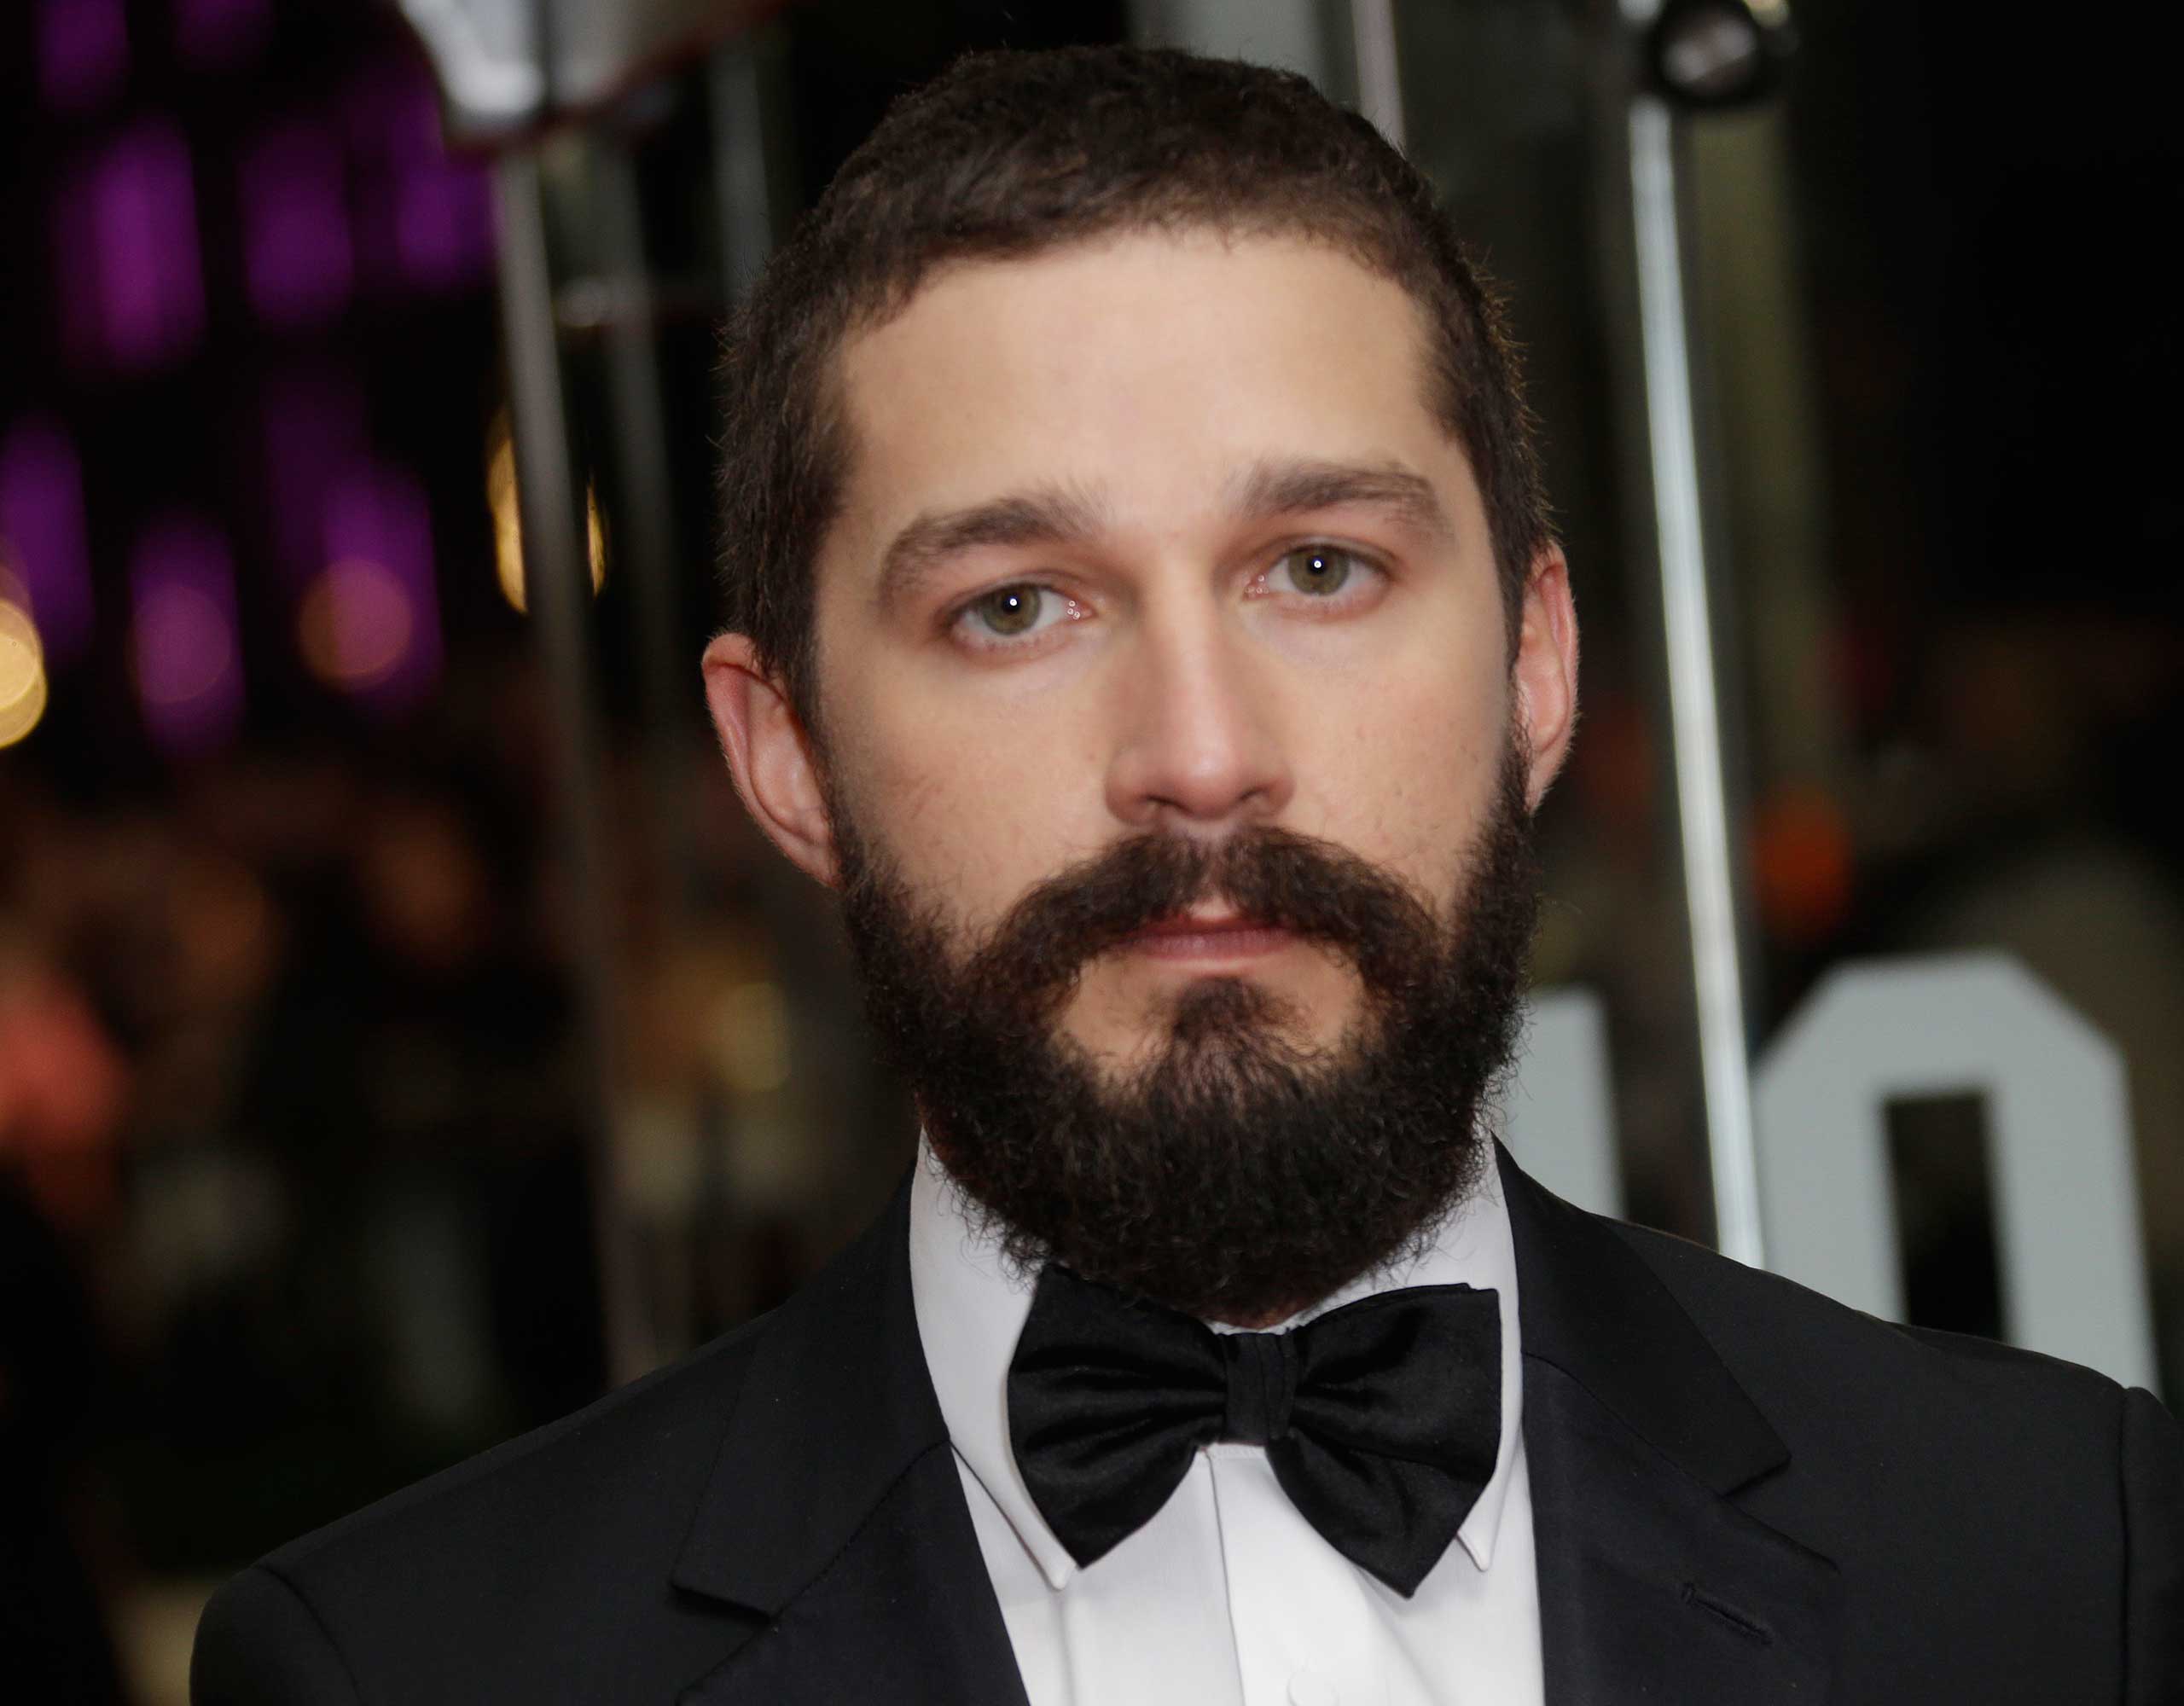 Shia LaBeouf poses for photographers at a film premiere in London, Oct. 19, 2014. (Joel Ryan—Invision/AP)